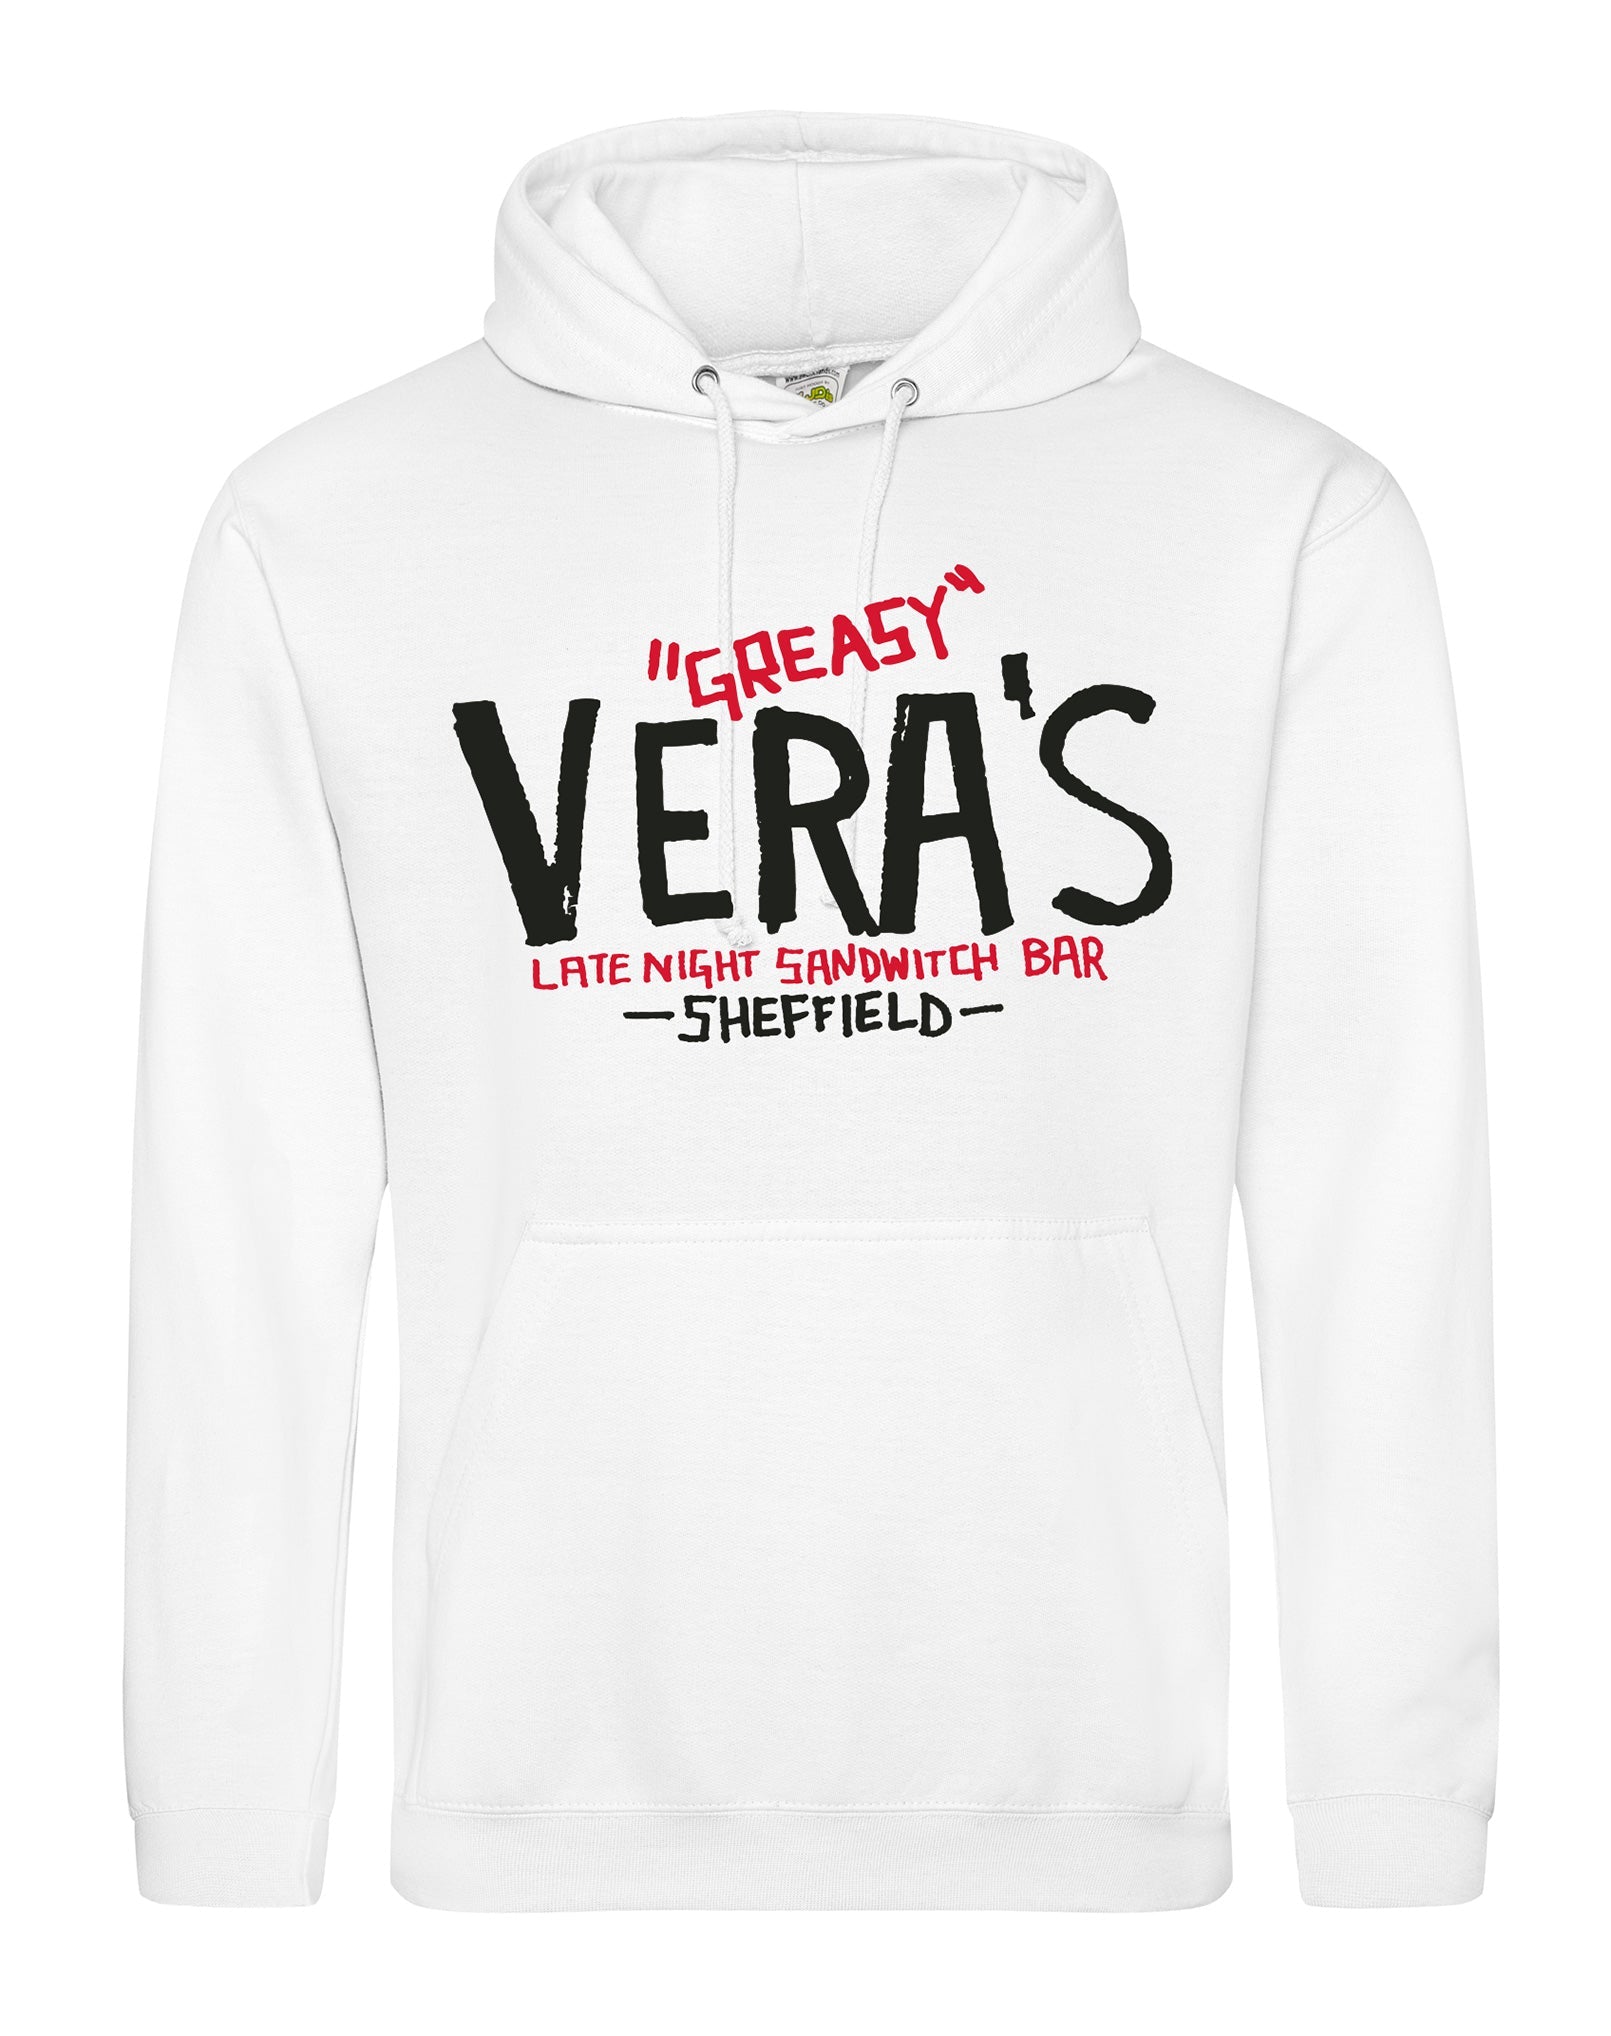 Greasy Vera's (original logo) unisex fit hoodie - various colours - Dirty Stop Outs